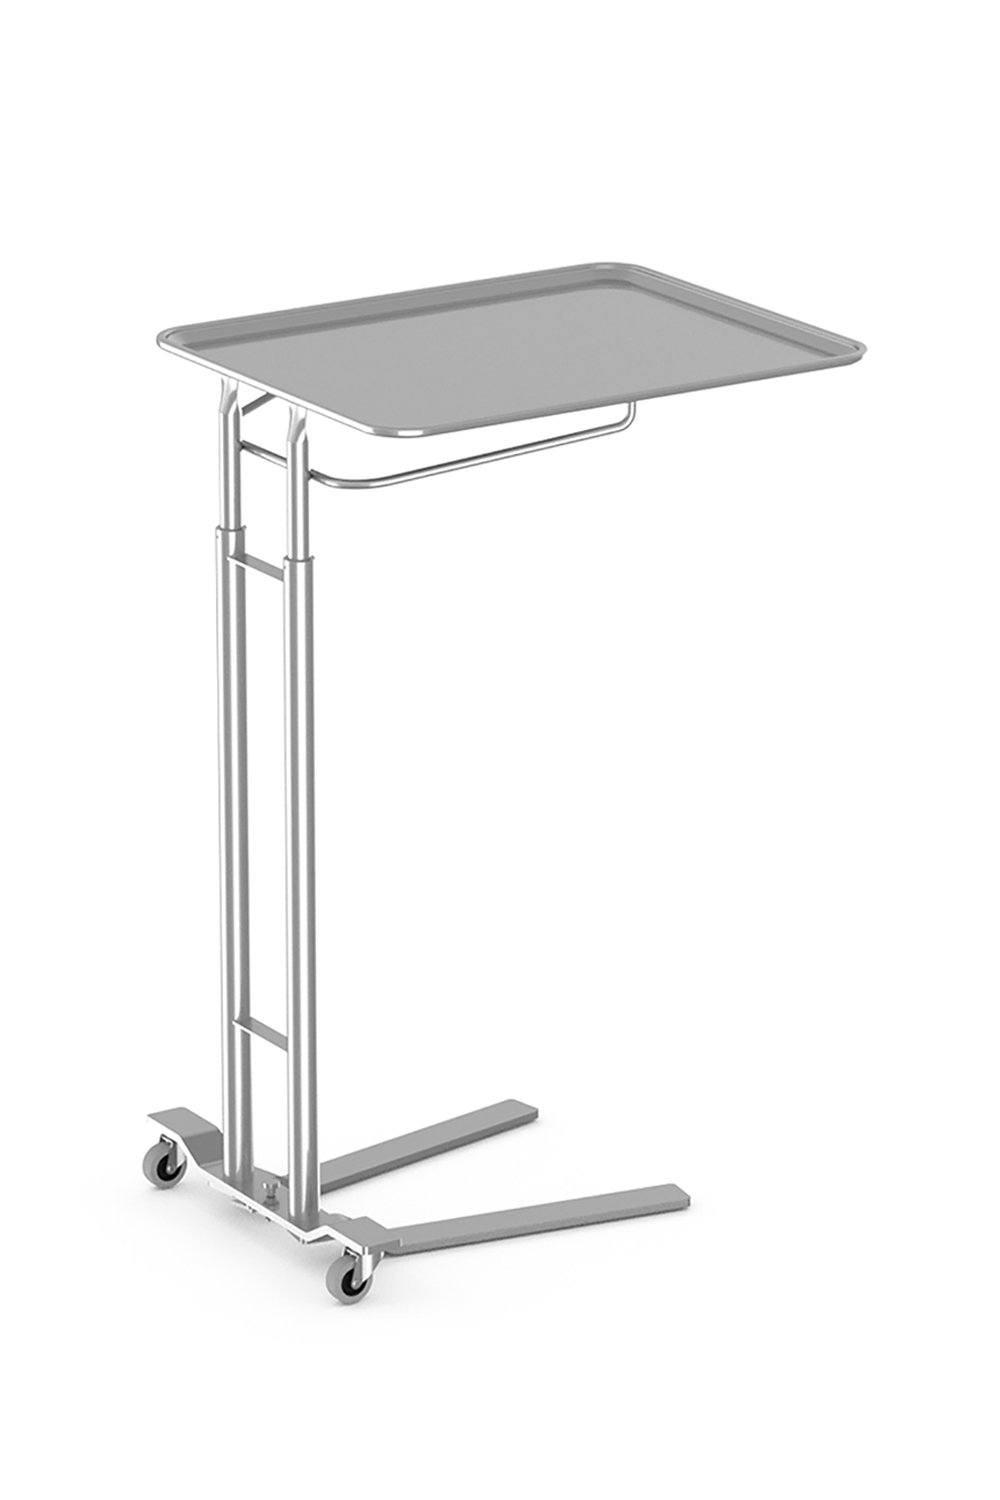 Mayo Stand Stainless Solutions Acart 25" x 20" x 36"W-58"H Foot Operated 20" x 25"